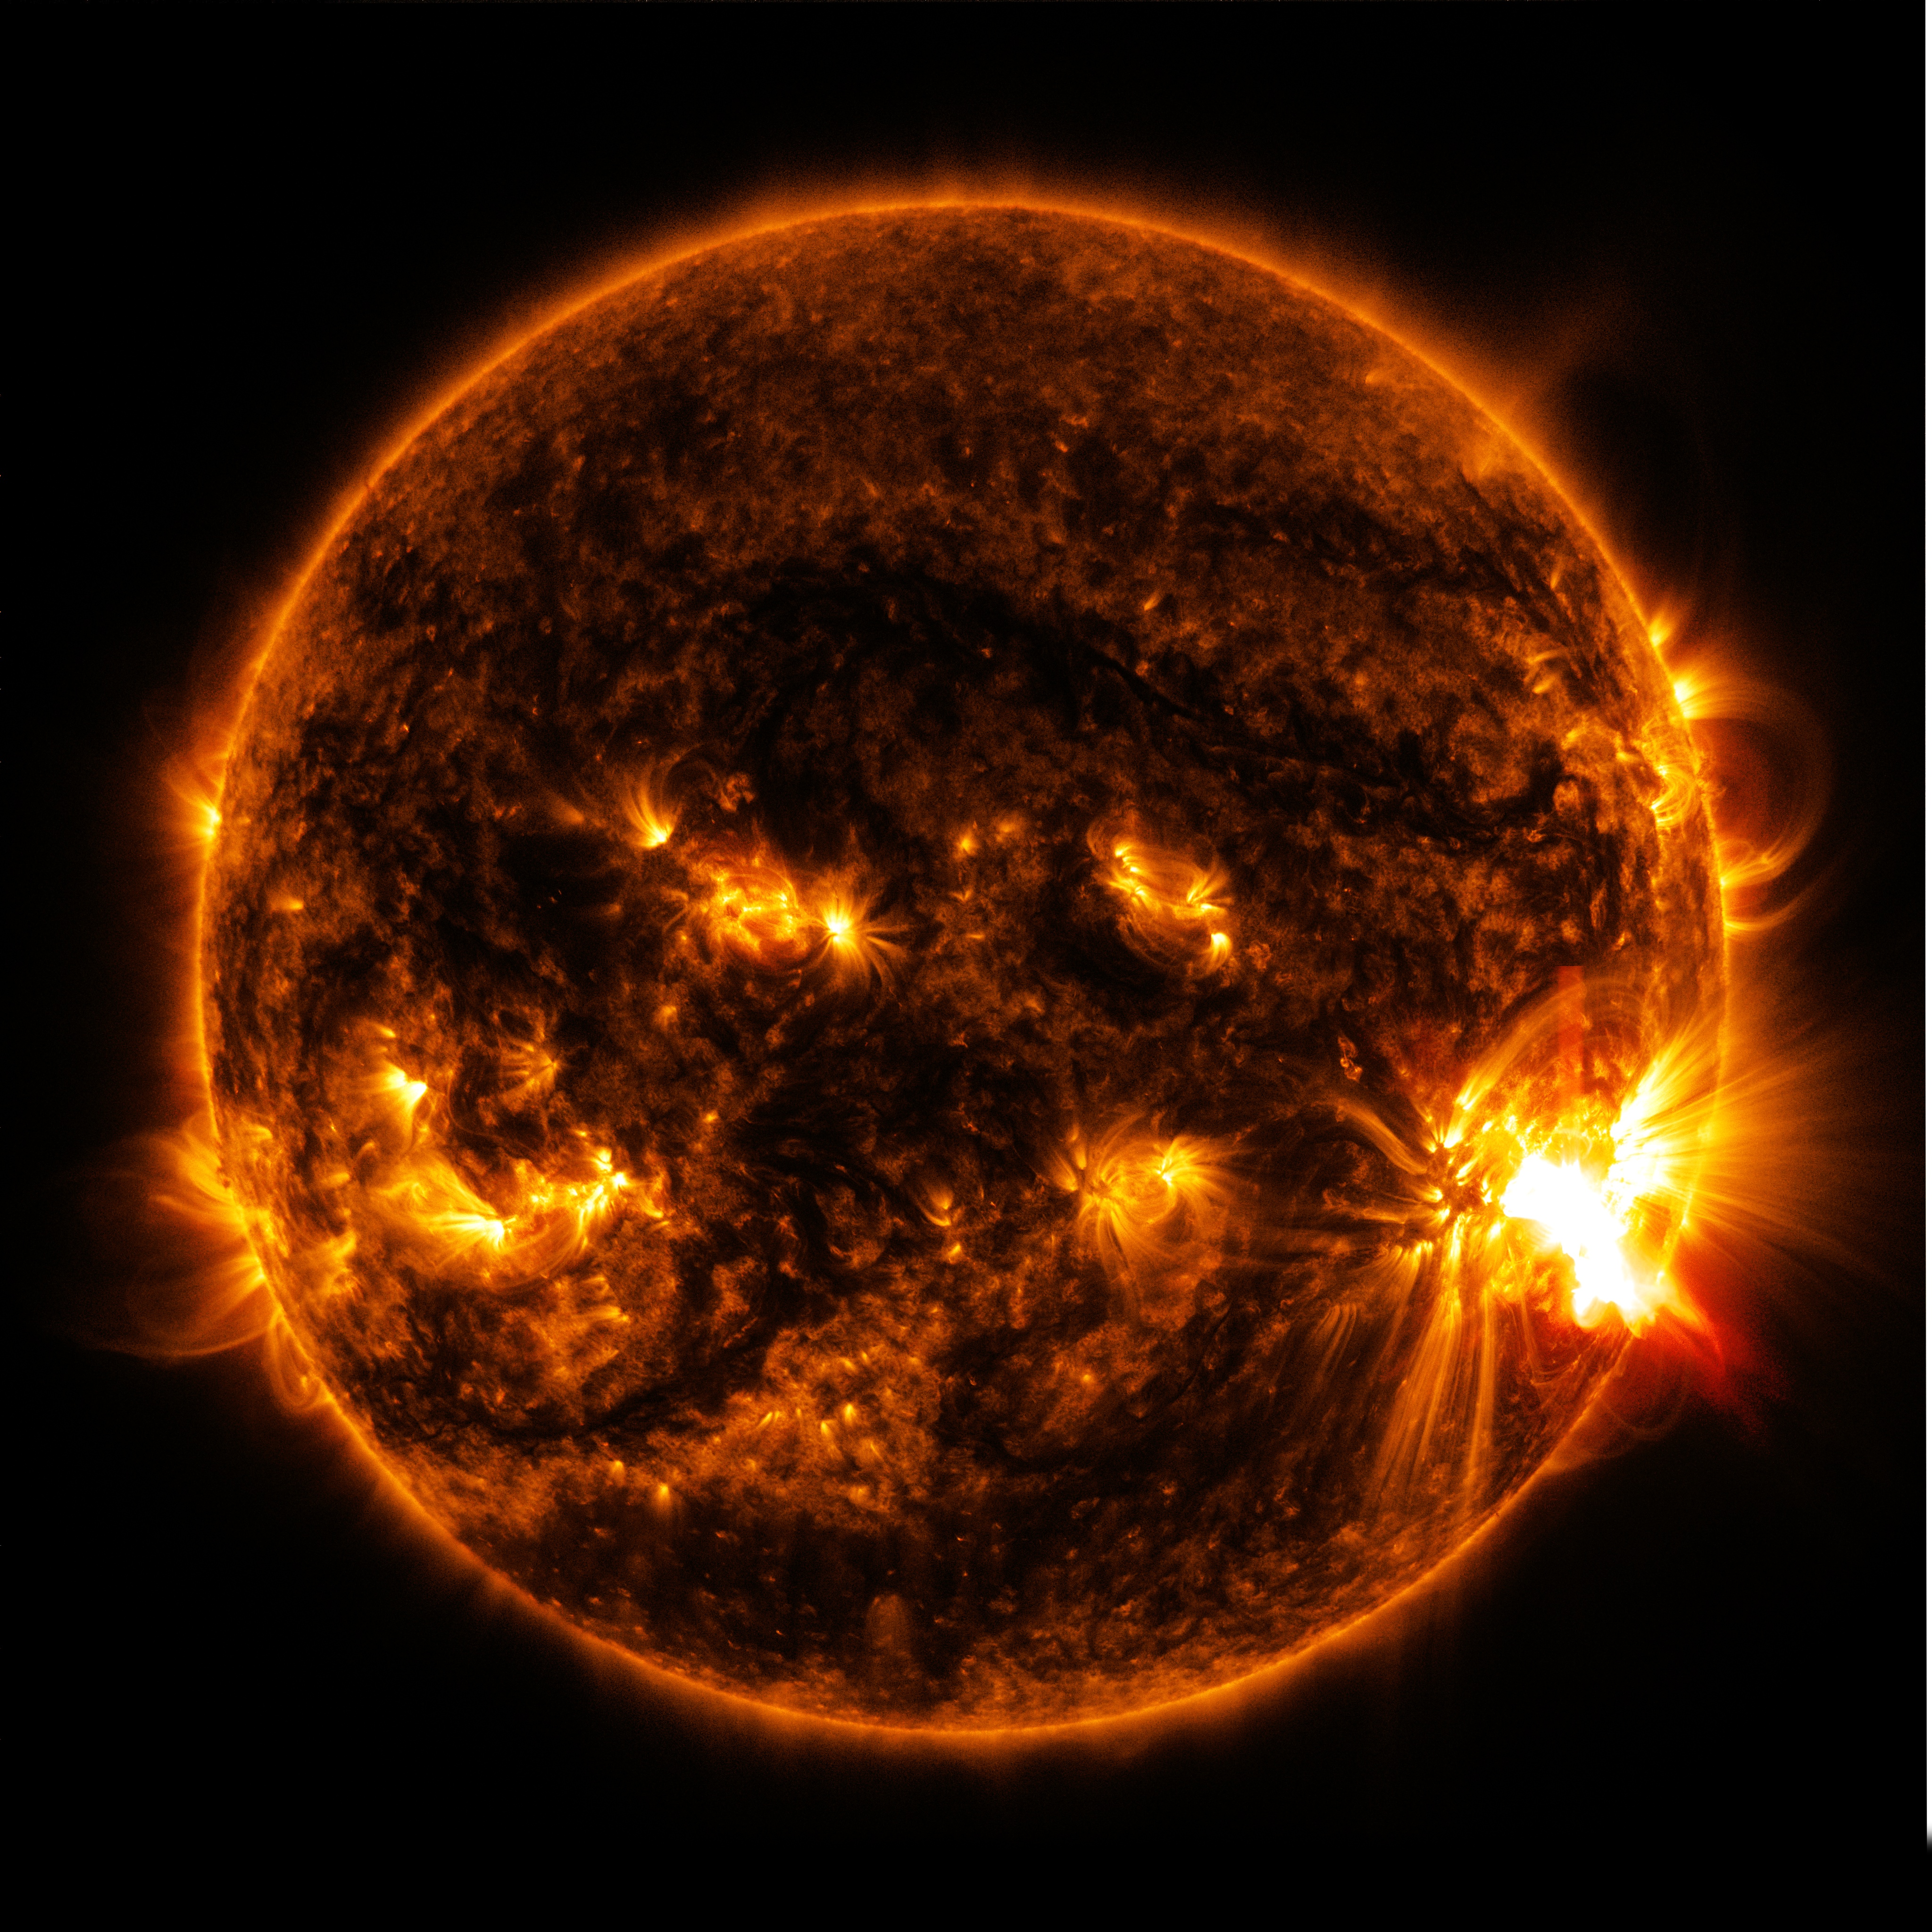 An image of the Sun, emphasizing bright spots where light and energy are being emitted